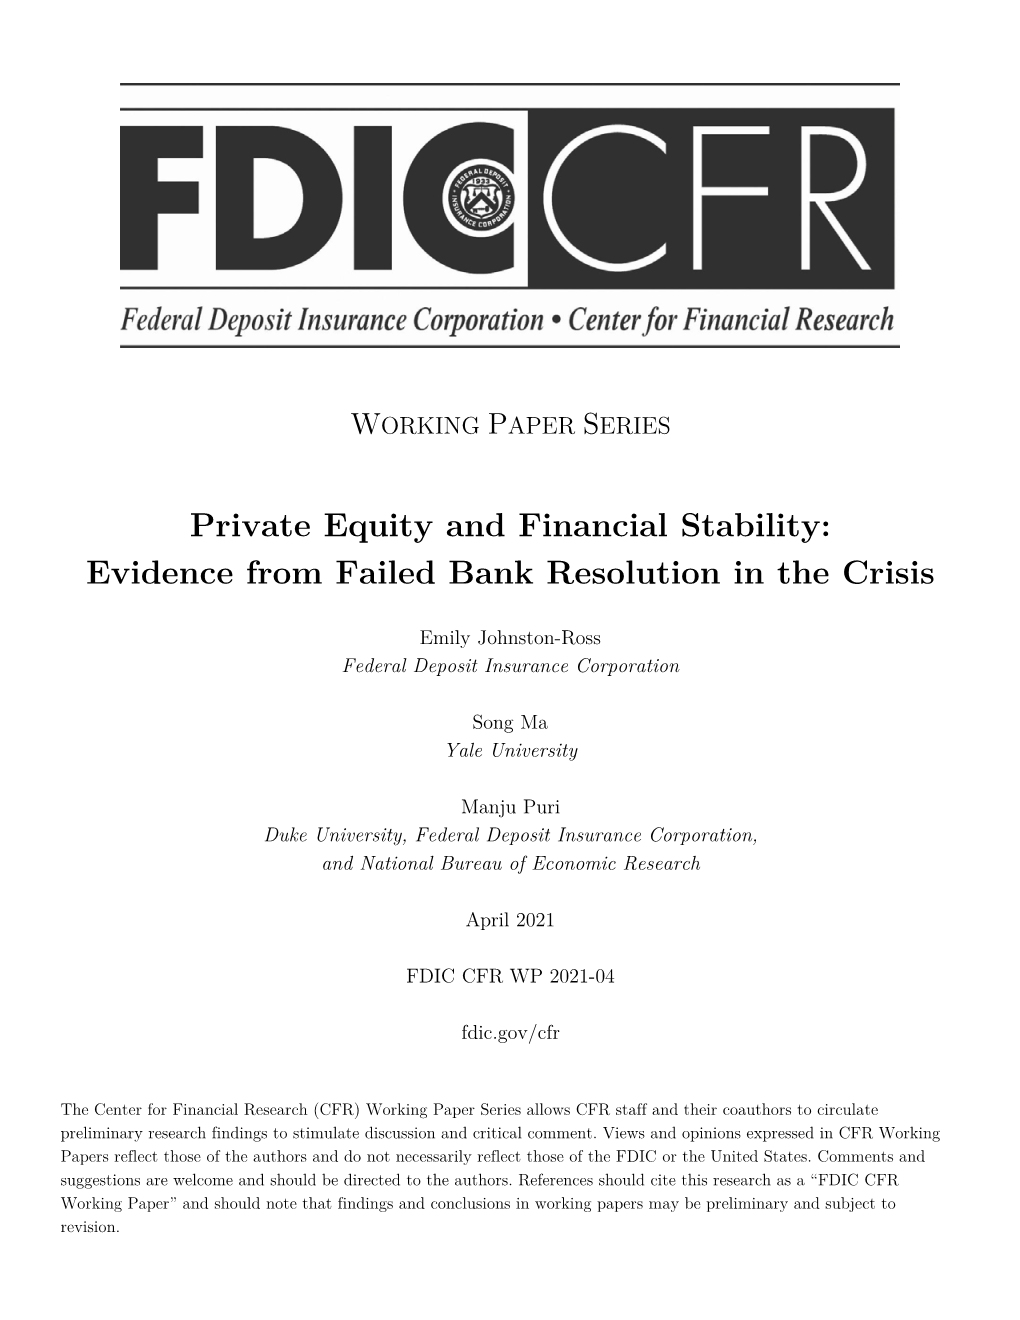 Private Equity and Financial Stability: Evidence from Failed Bank Resolution in the Crisis